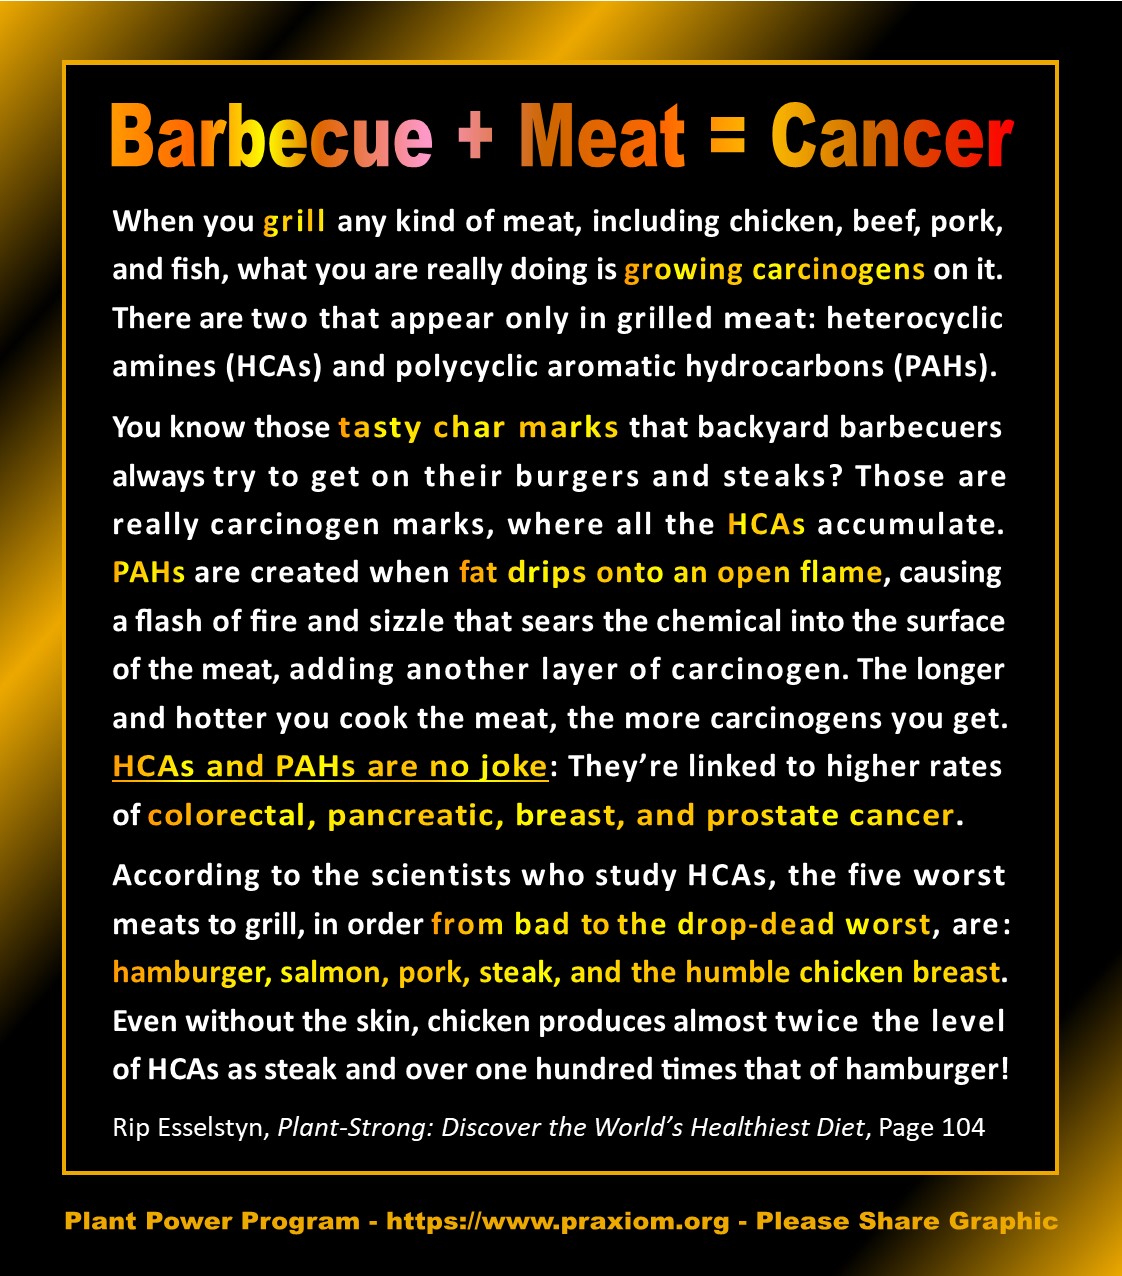 Barbecure + Meat = Cancer - Rip Esselstyn